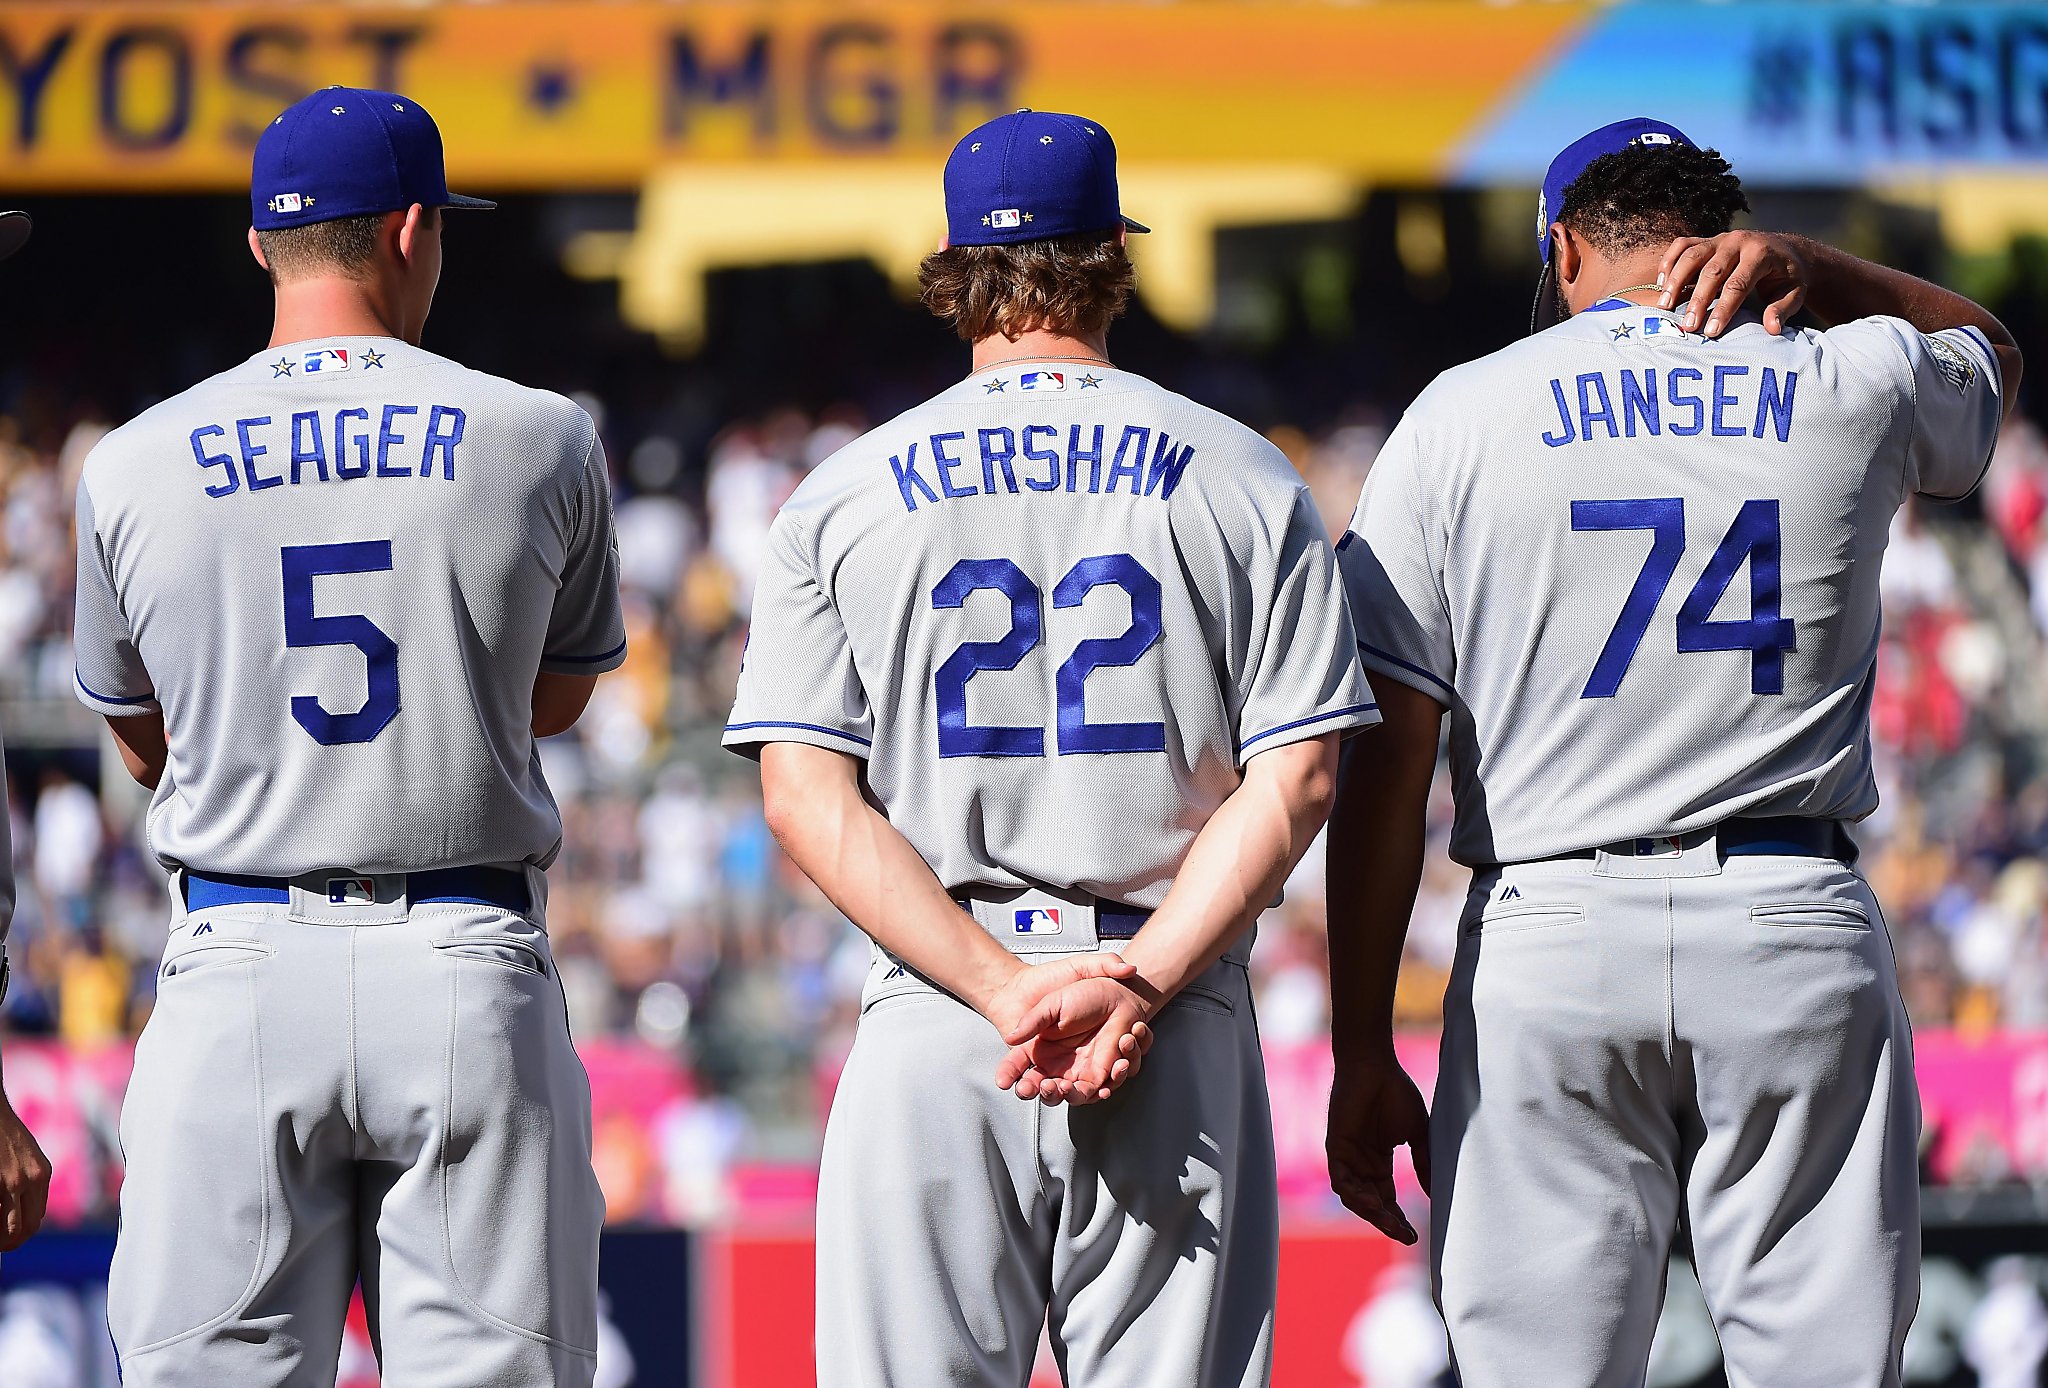 Dodgers' pursuit of Giants: 'We'll be there at the end'